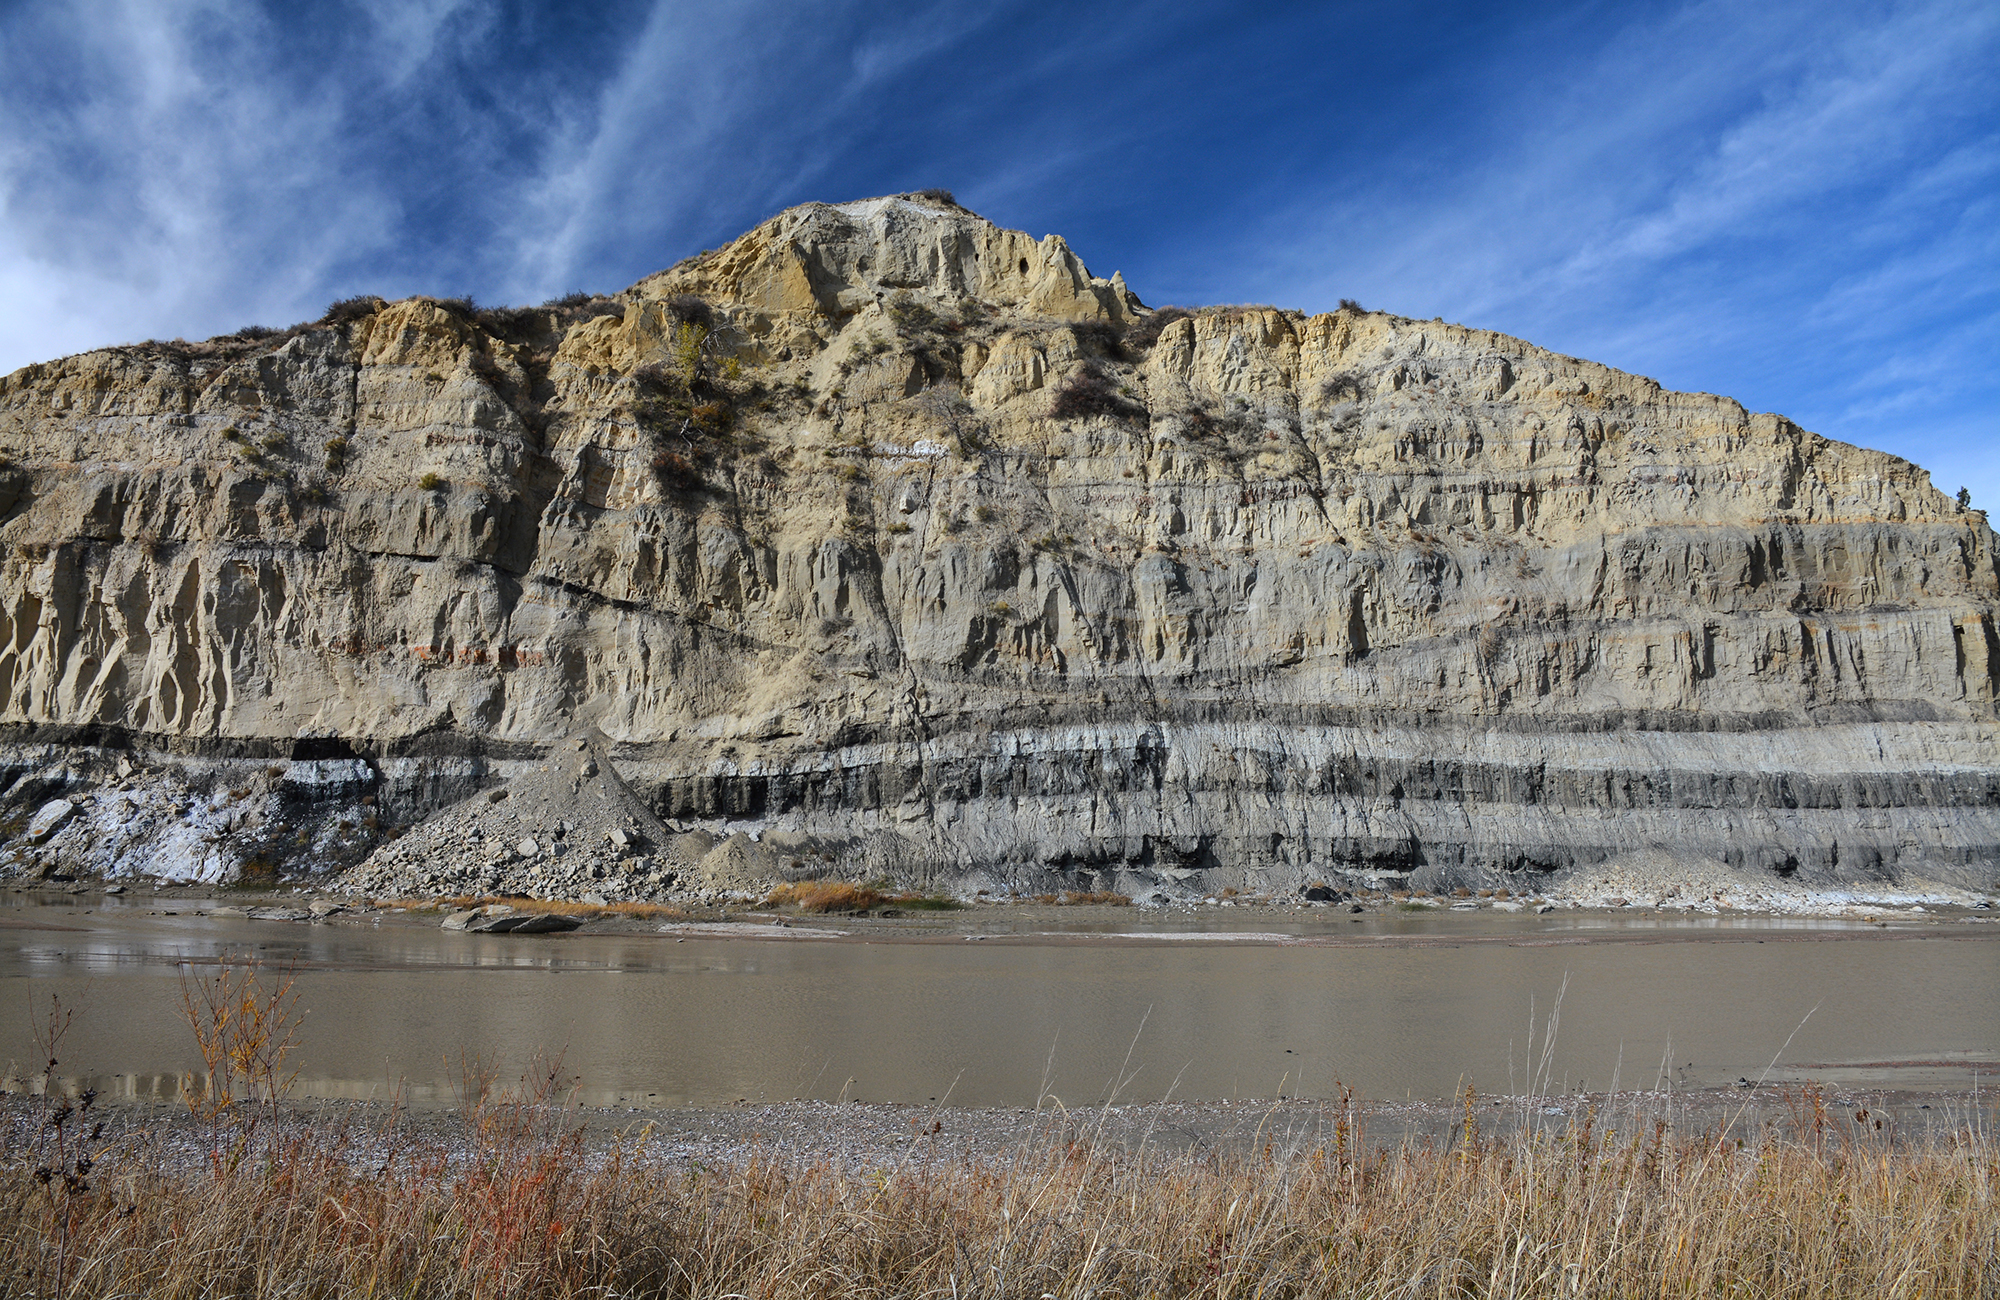 A tall rock formation streaked with coal next to a river against a very dark blue sky.